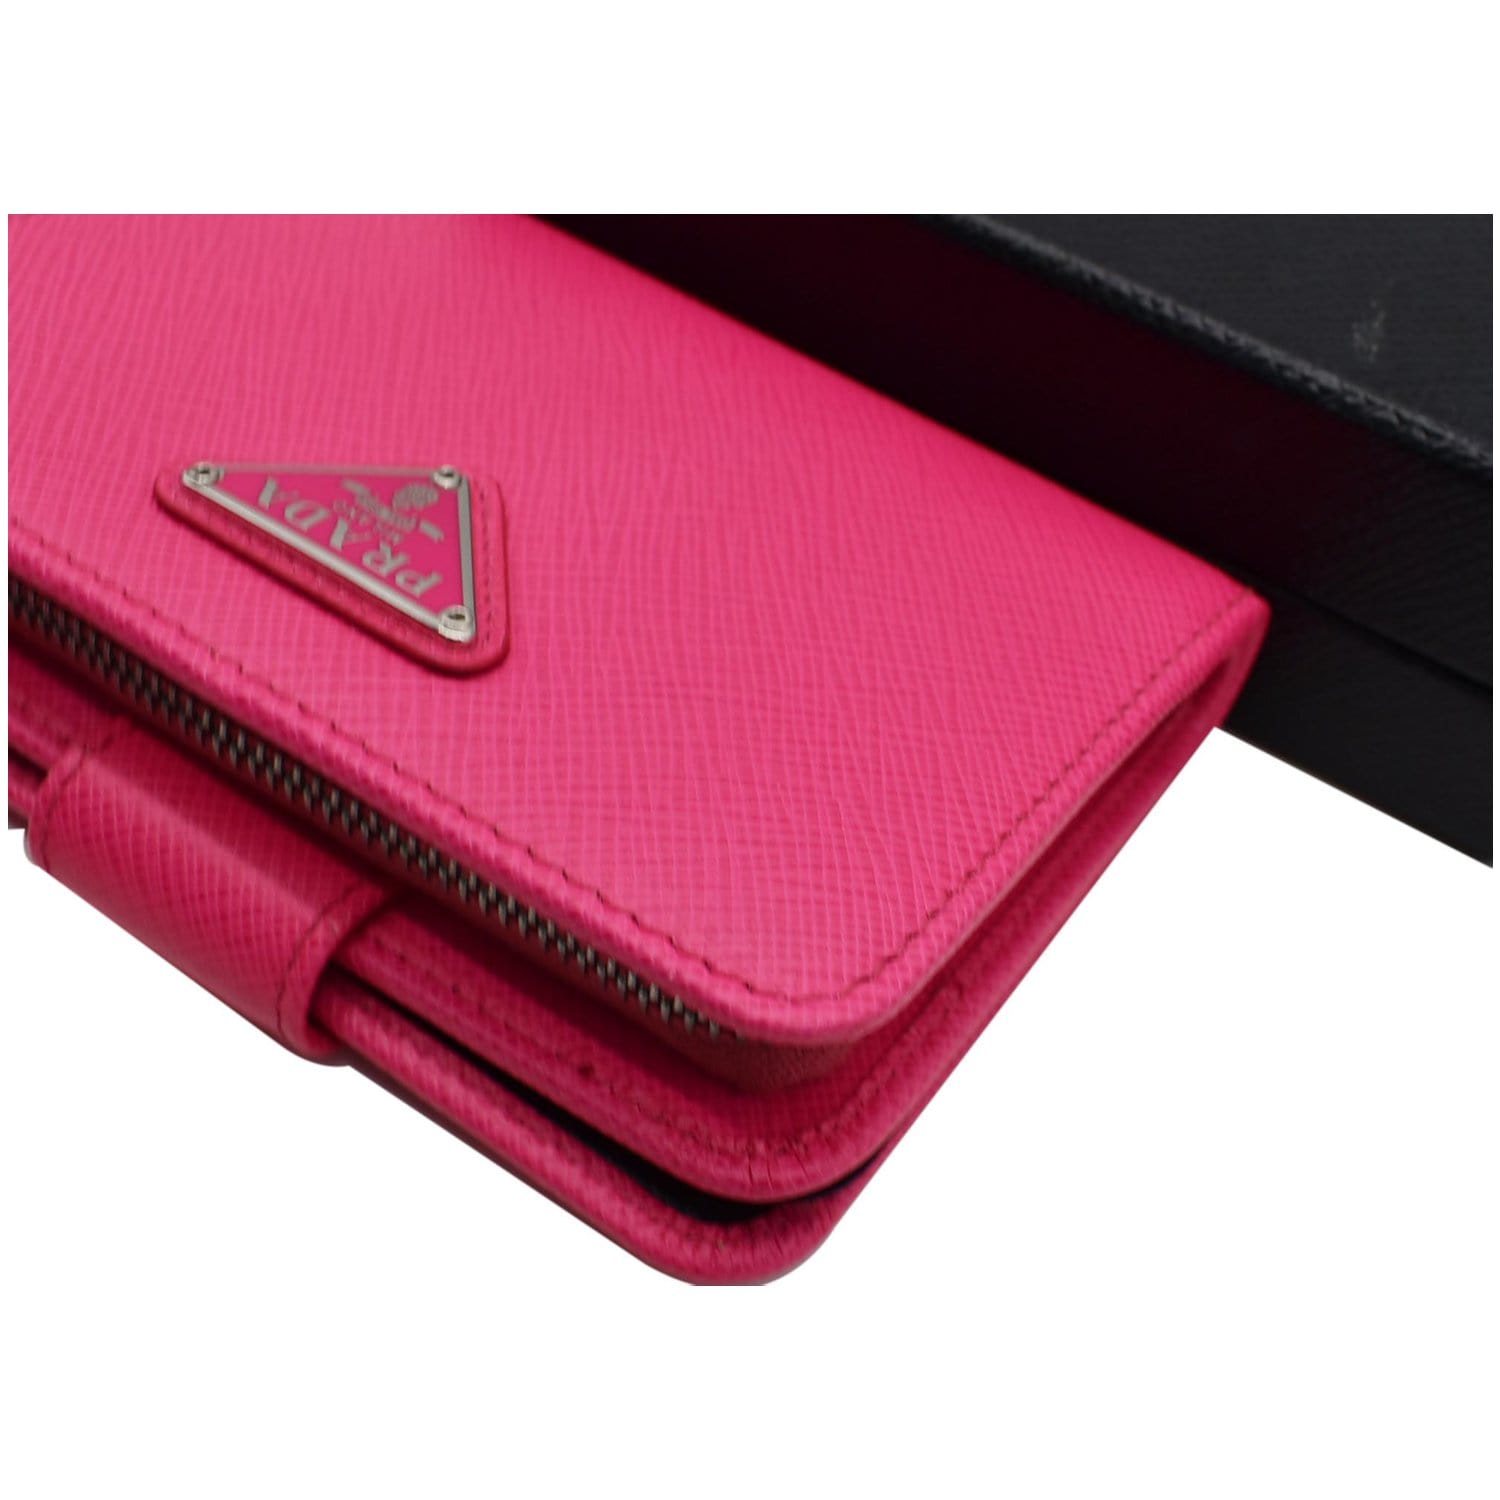 prada small saffiano leather wallet pink, RvceShops Revival